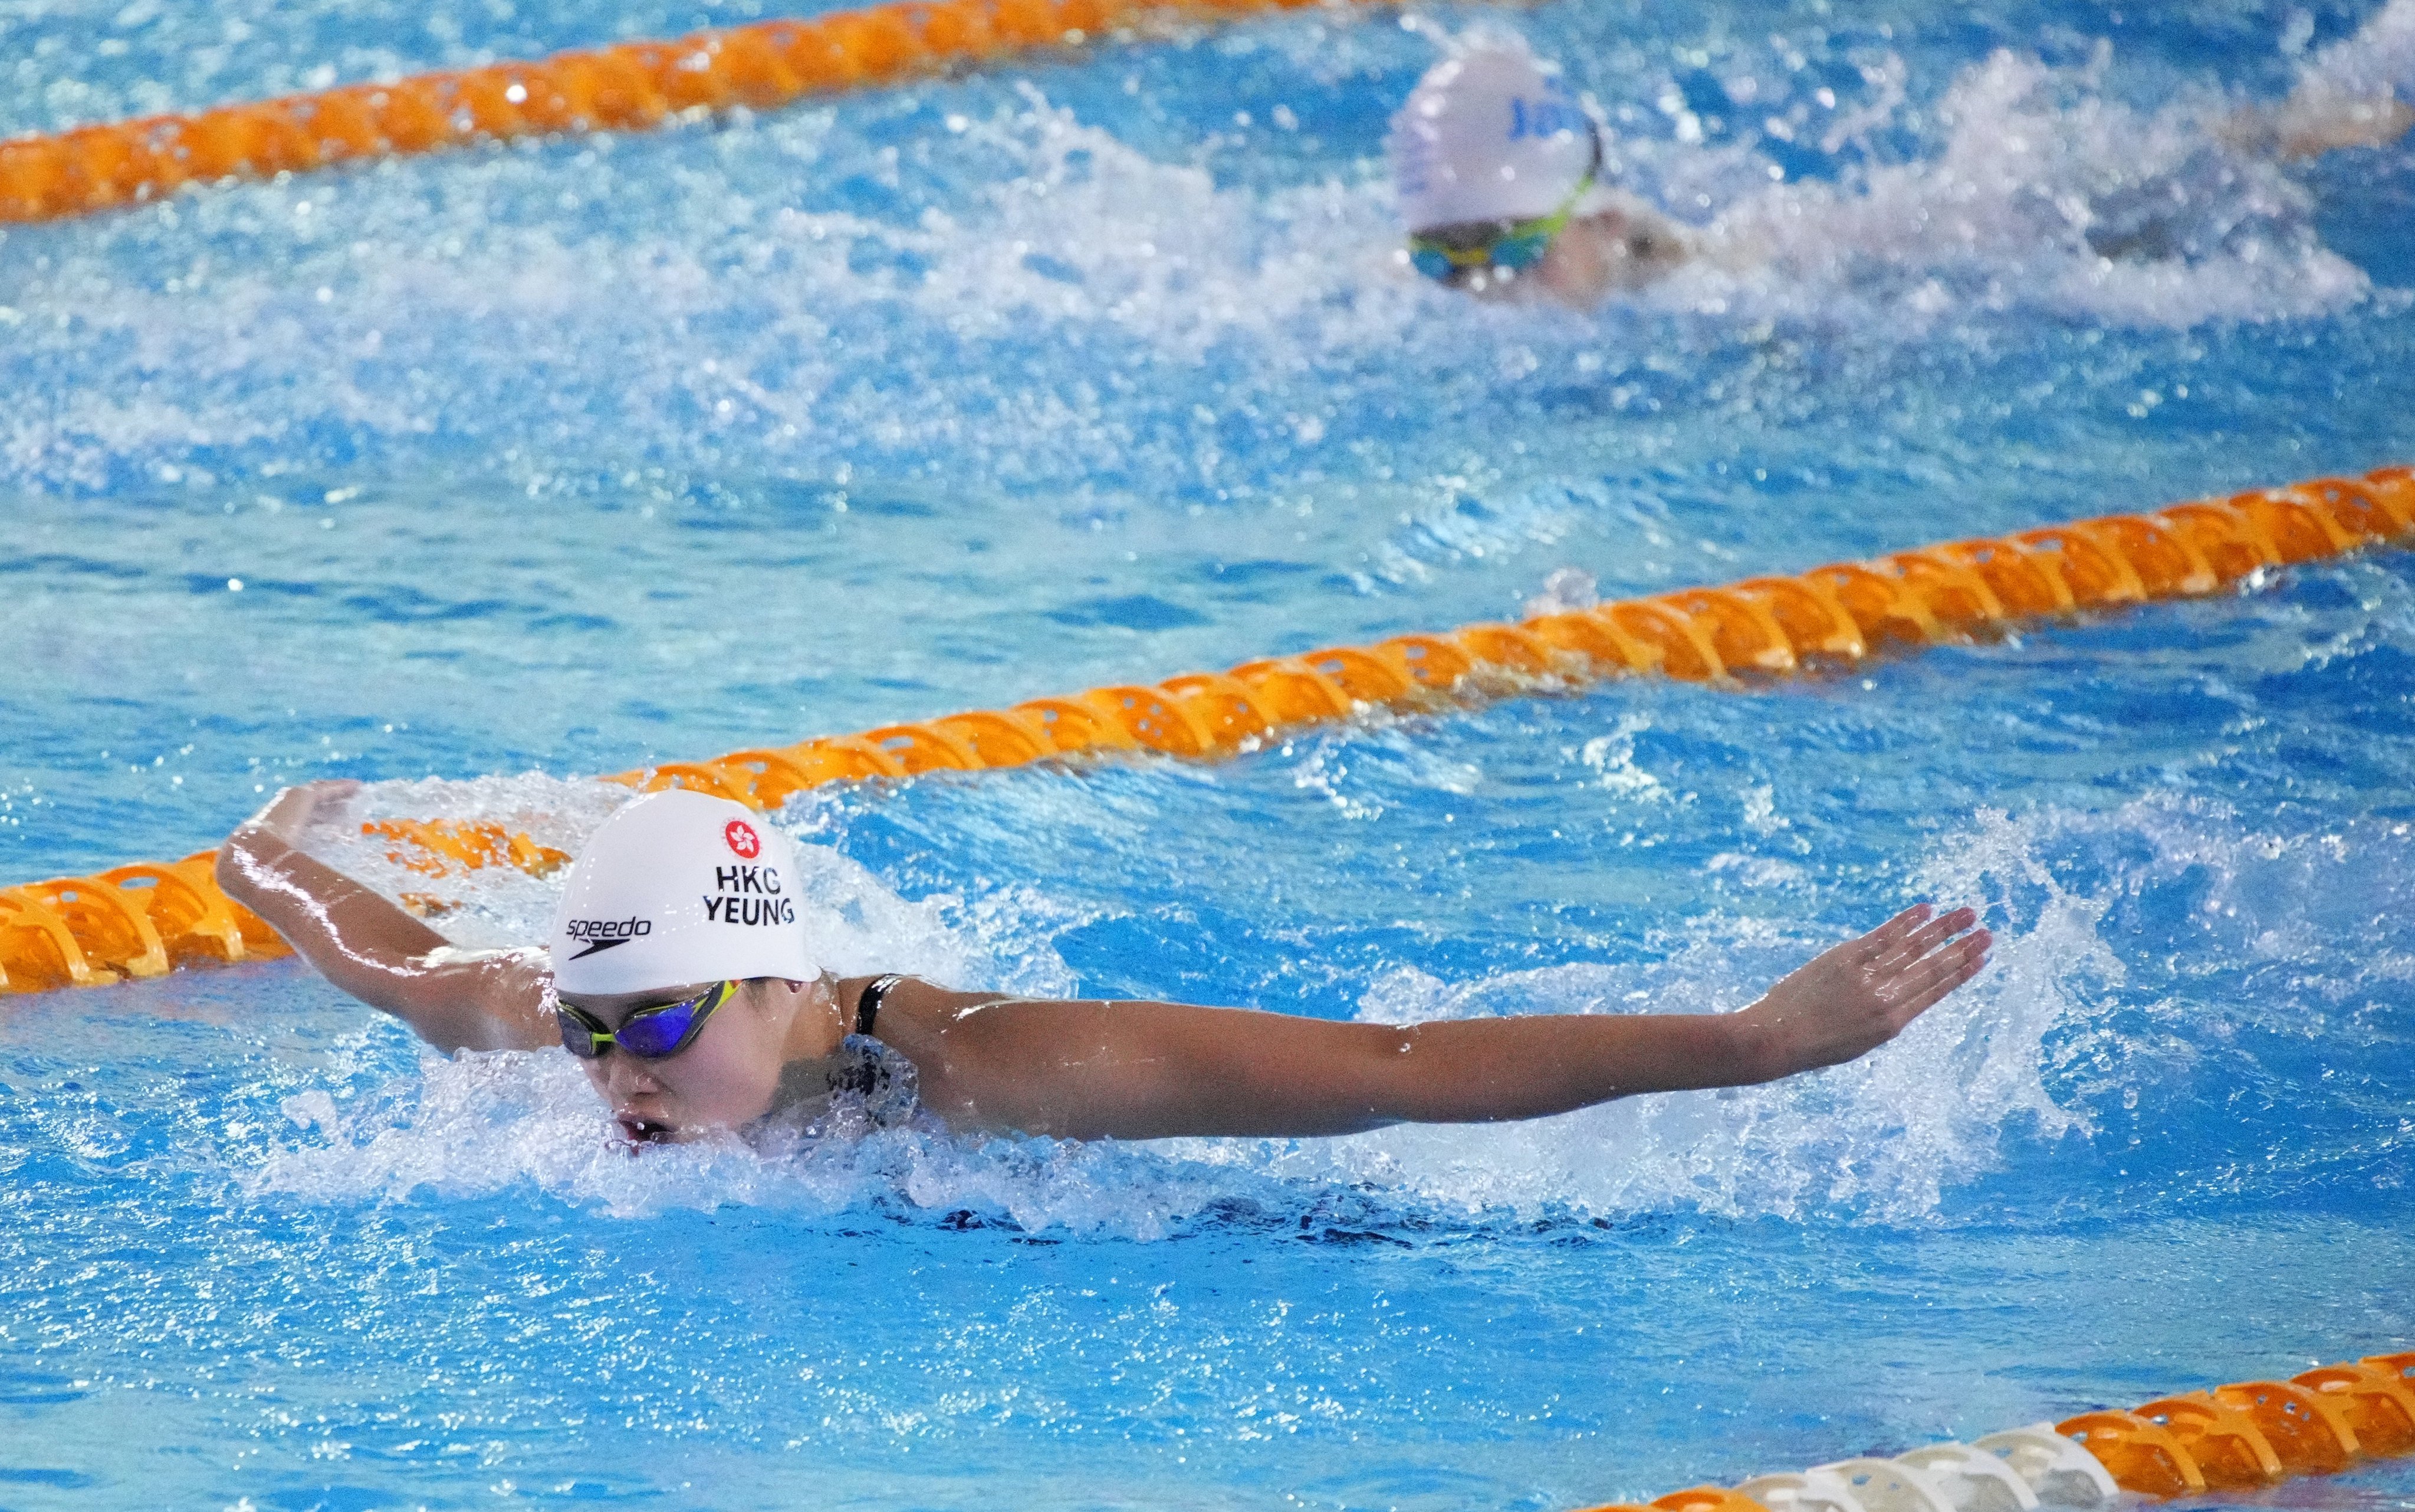 Yeung Hoi-ching breaks the Hong Kong record in the women’s 200m butterfly during the National Long Course Swimming Trial at the Hong Kong Sports Institute in Fo Tan on April 14. Photo: Eugene Lee